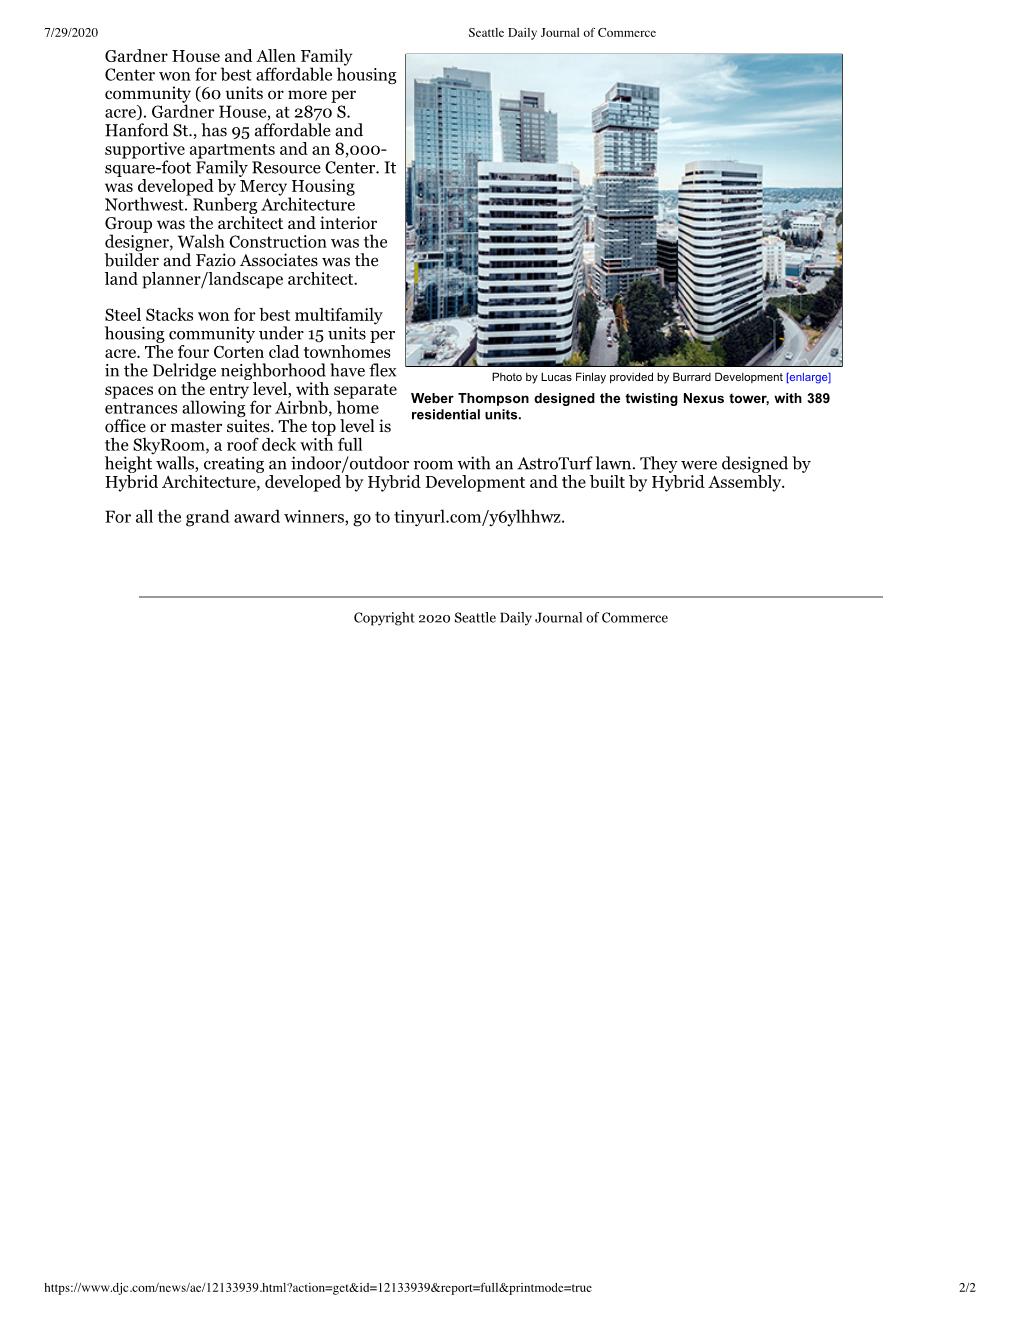 Seattle Daily Journal Of Commercegold Nugget Awards 2020 Page 002